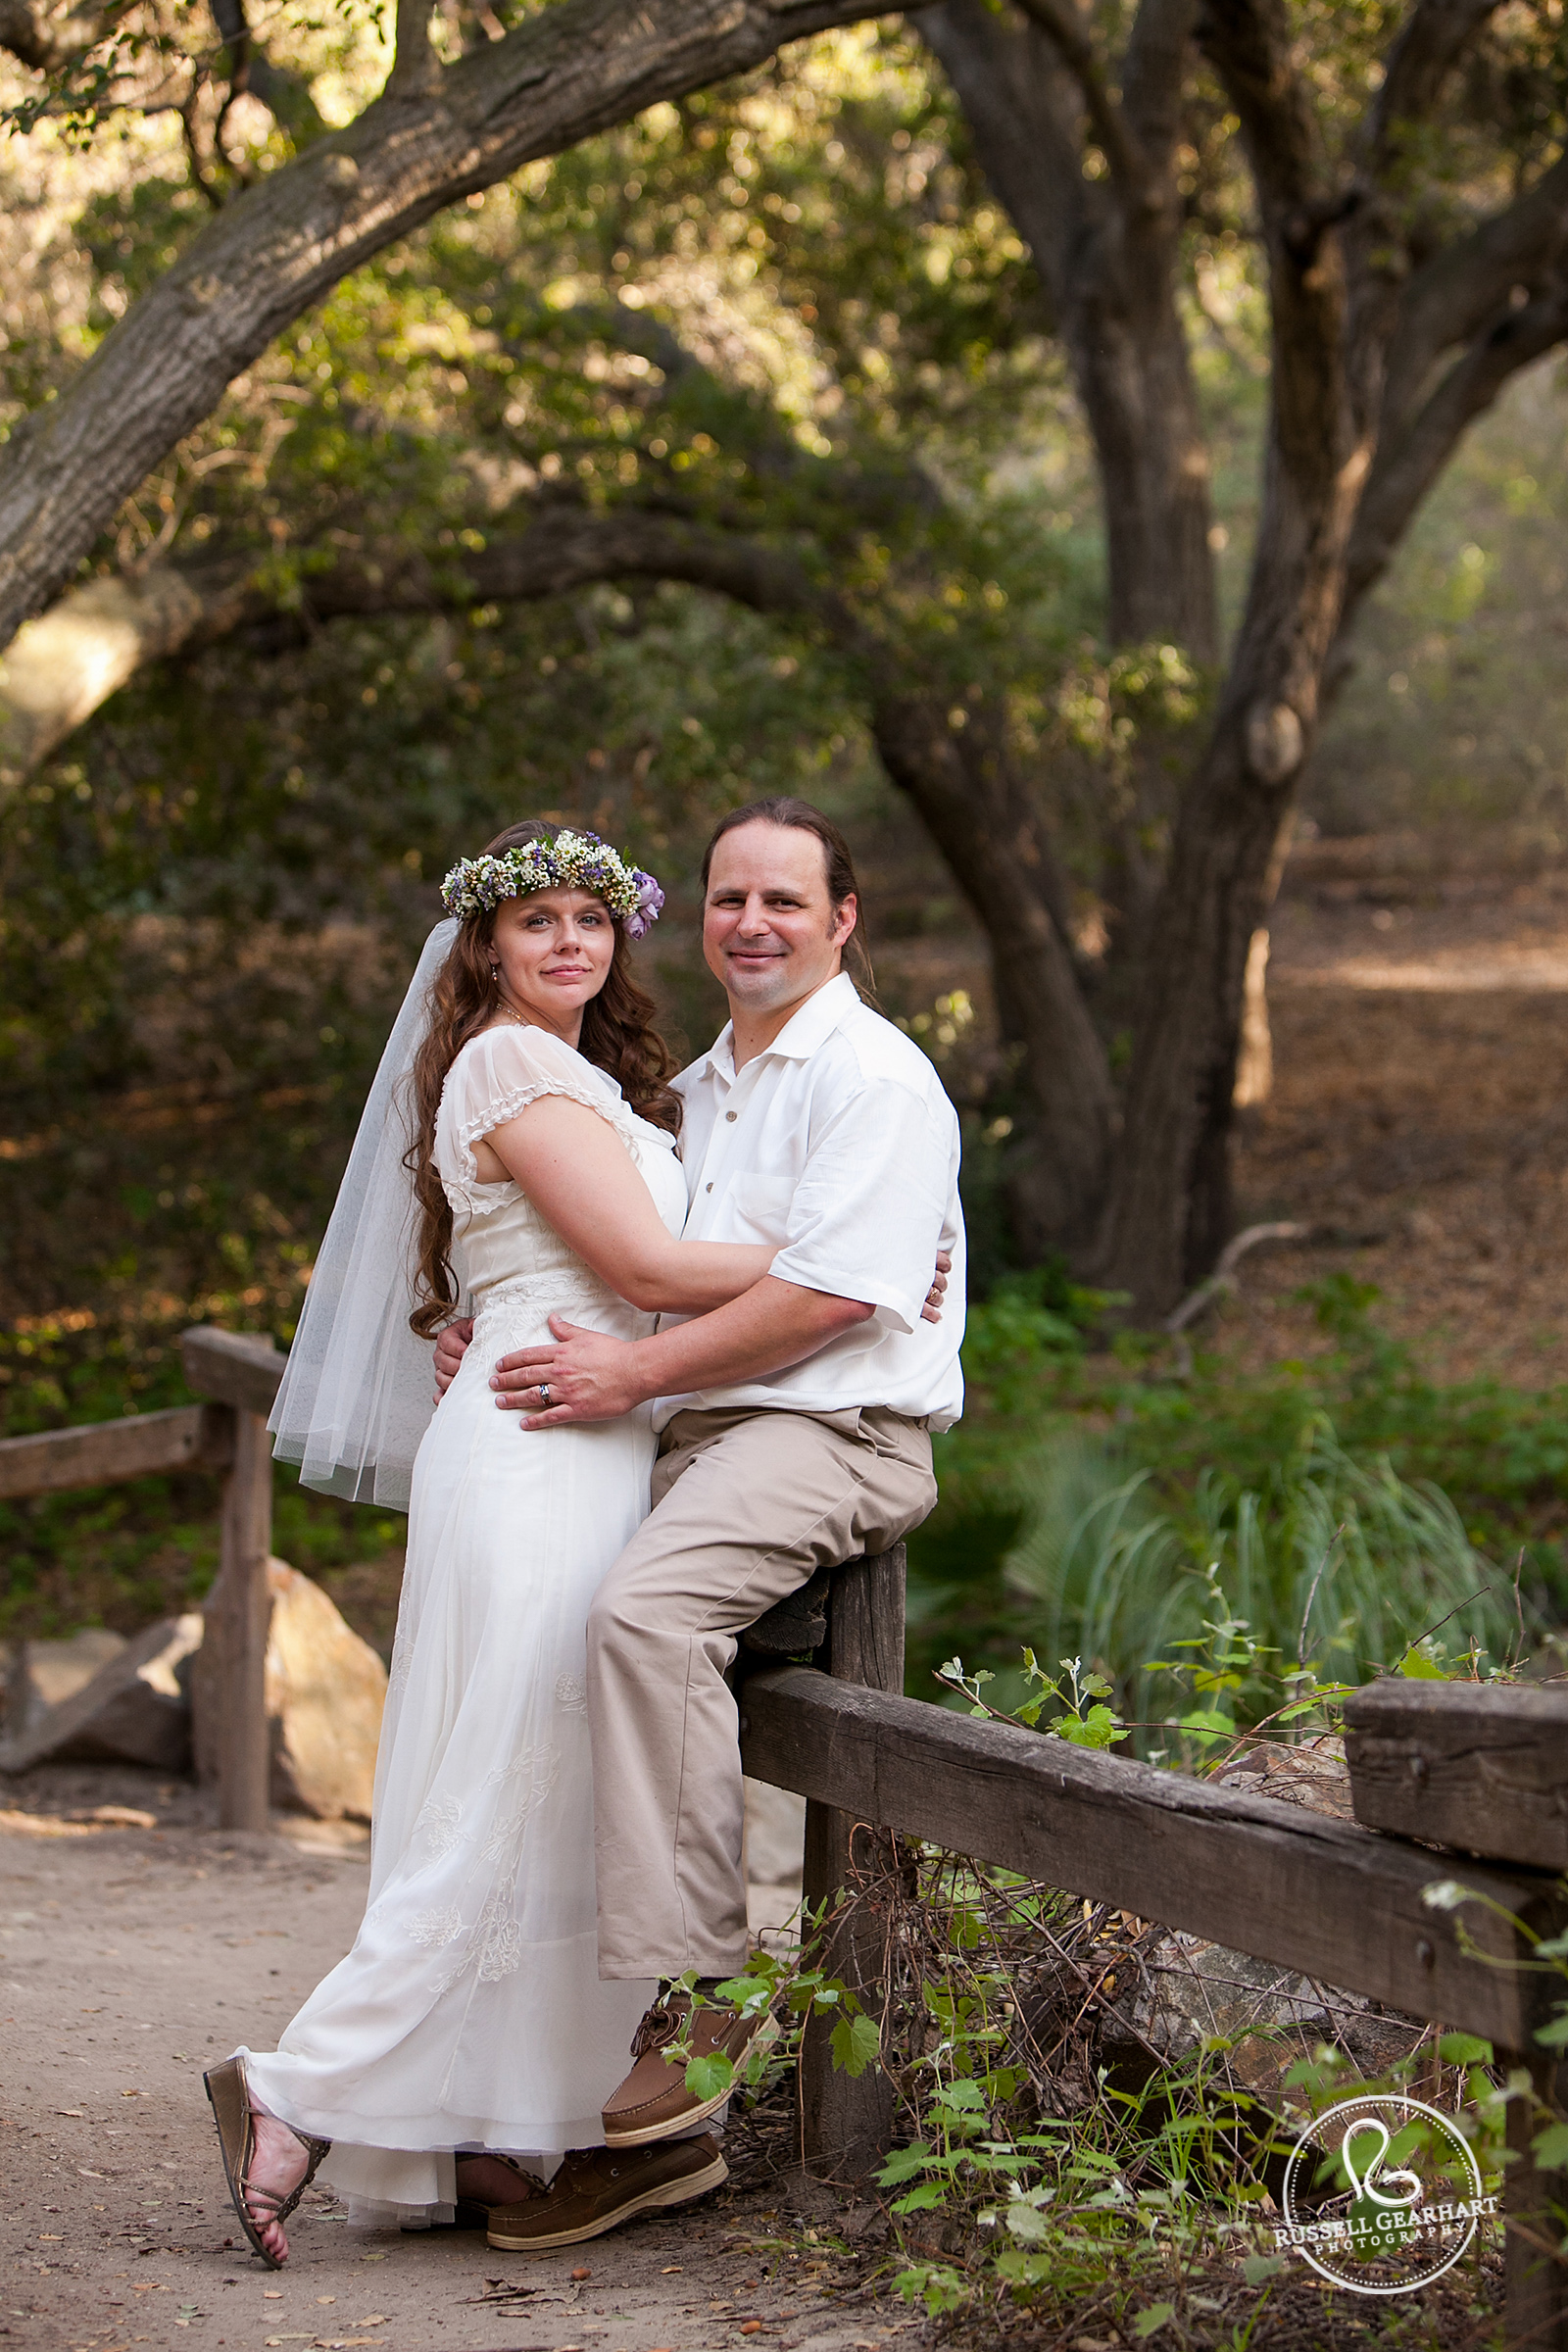 Orange County Park Bride and Groom Portrait – Russell Gearhart Photography – www.gearhartphoto.com  